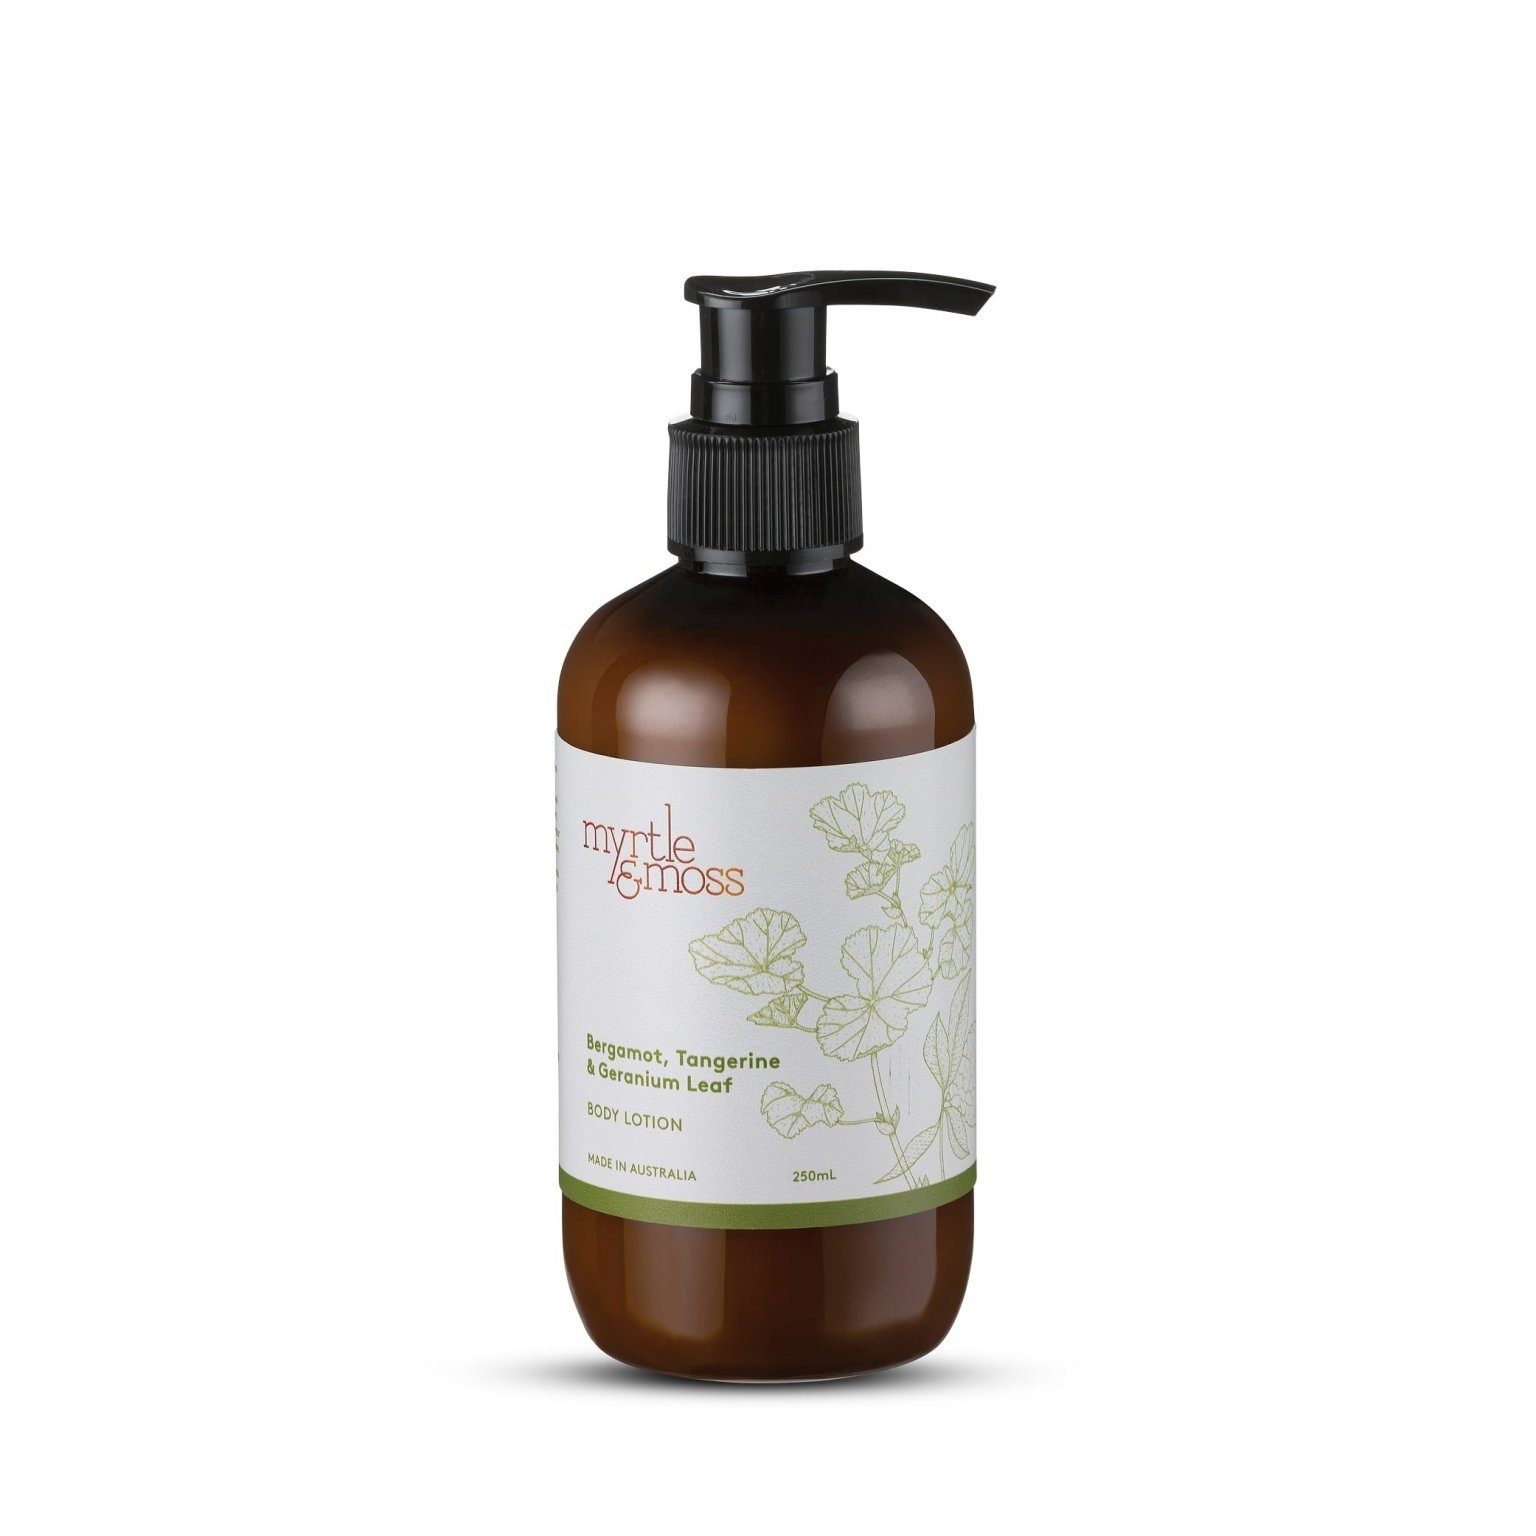 Myrtle & Moss - Body Lotion 250g: Choose Scent